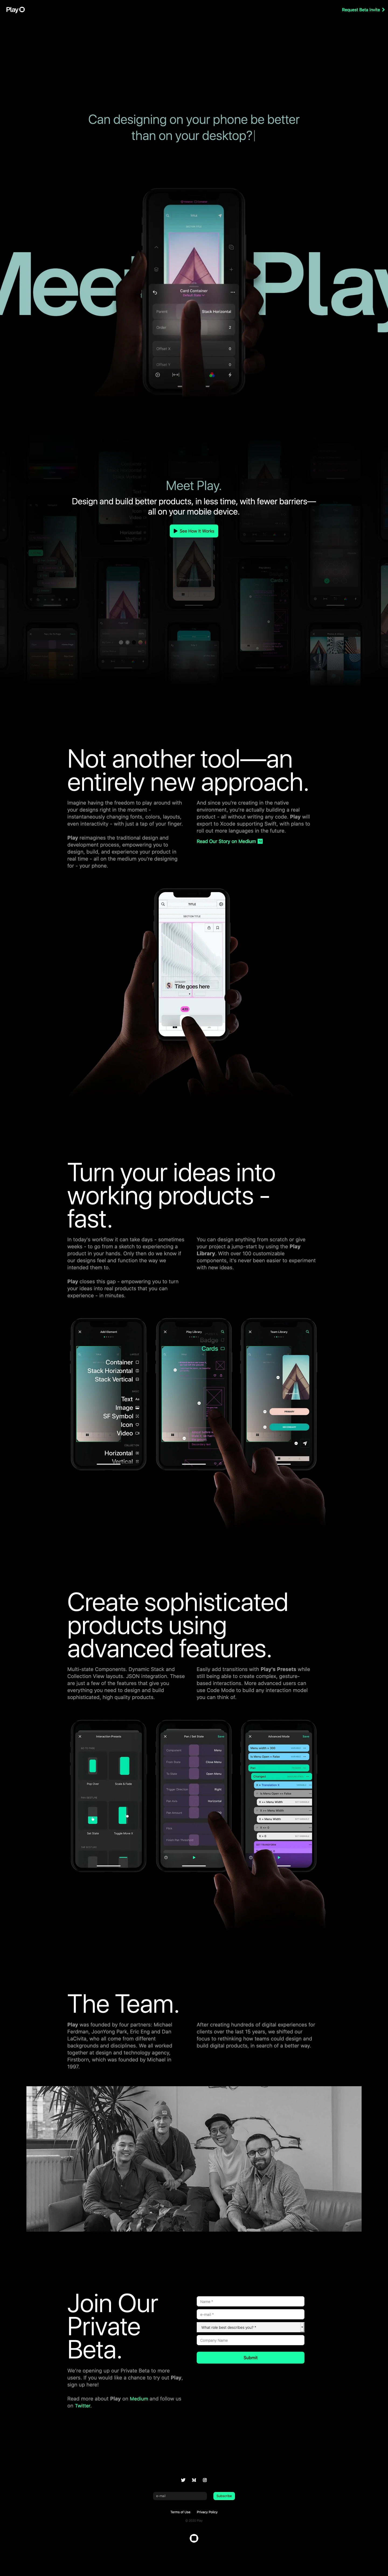 Play Landing Page Example: Play empowers you to design, build and launch better mobile products, in less time, with fewer barriers - all on your mobile device.